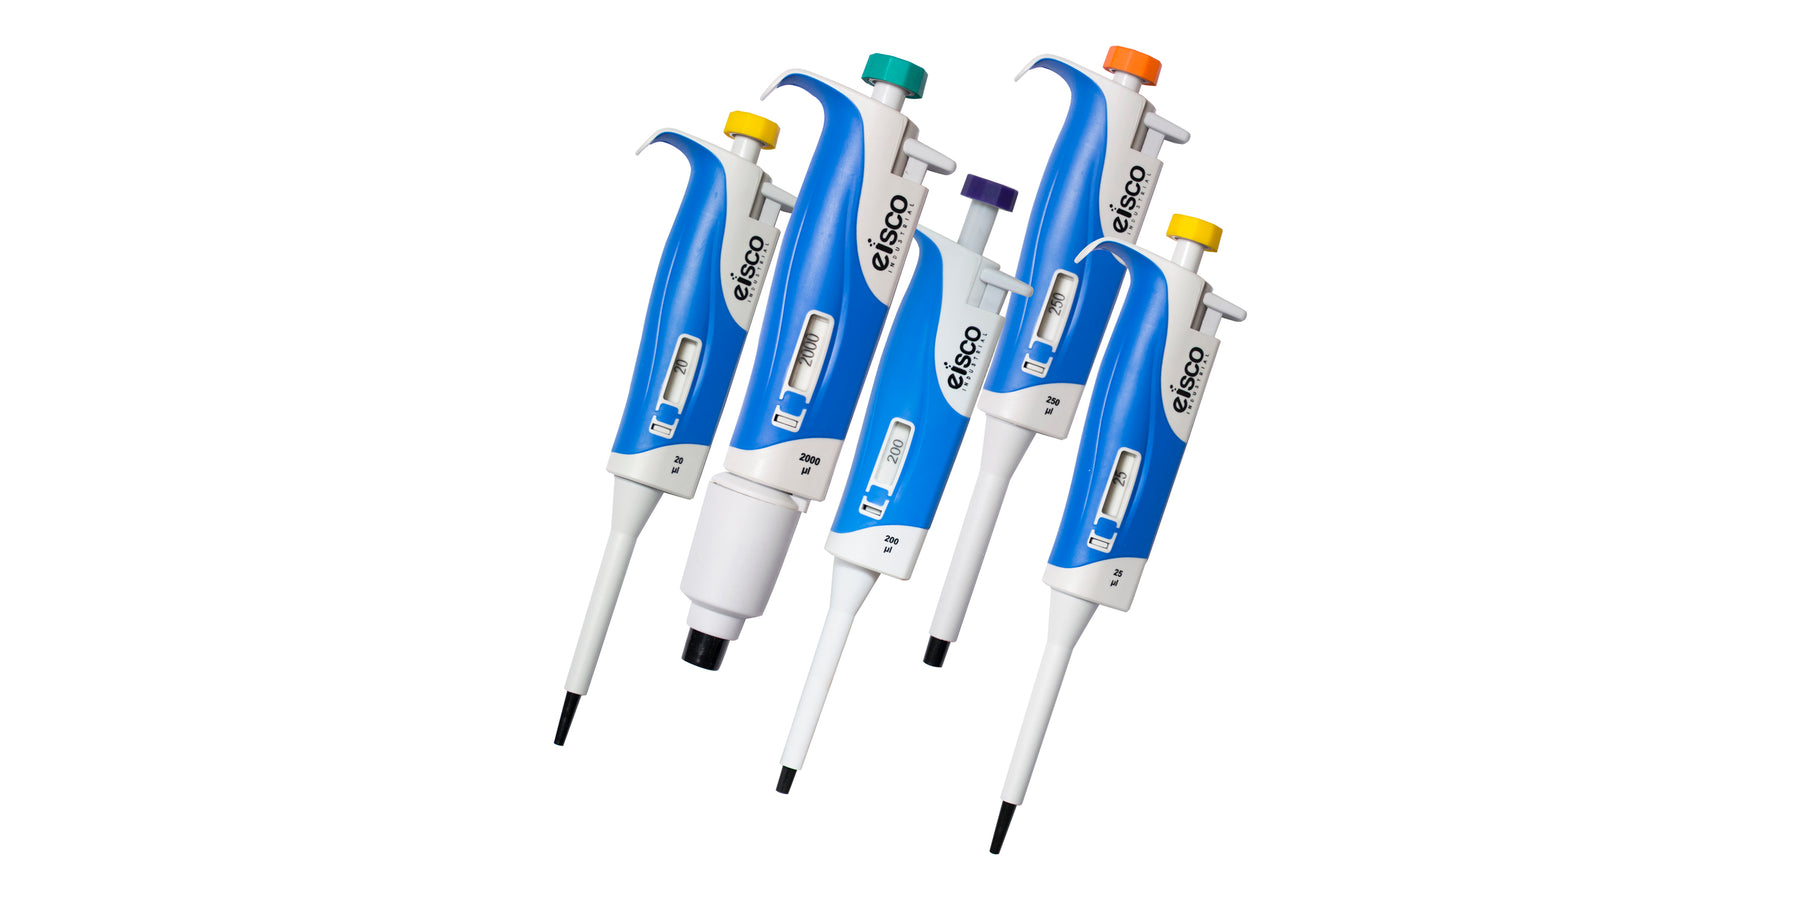 New Eisco High Performance Micropipettes Deliver on Features